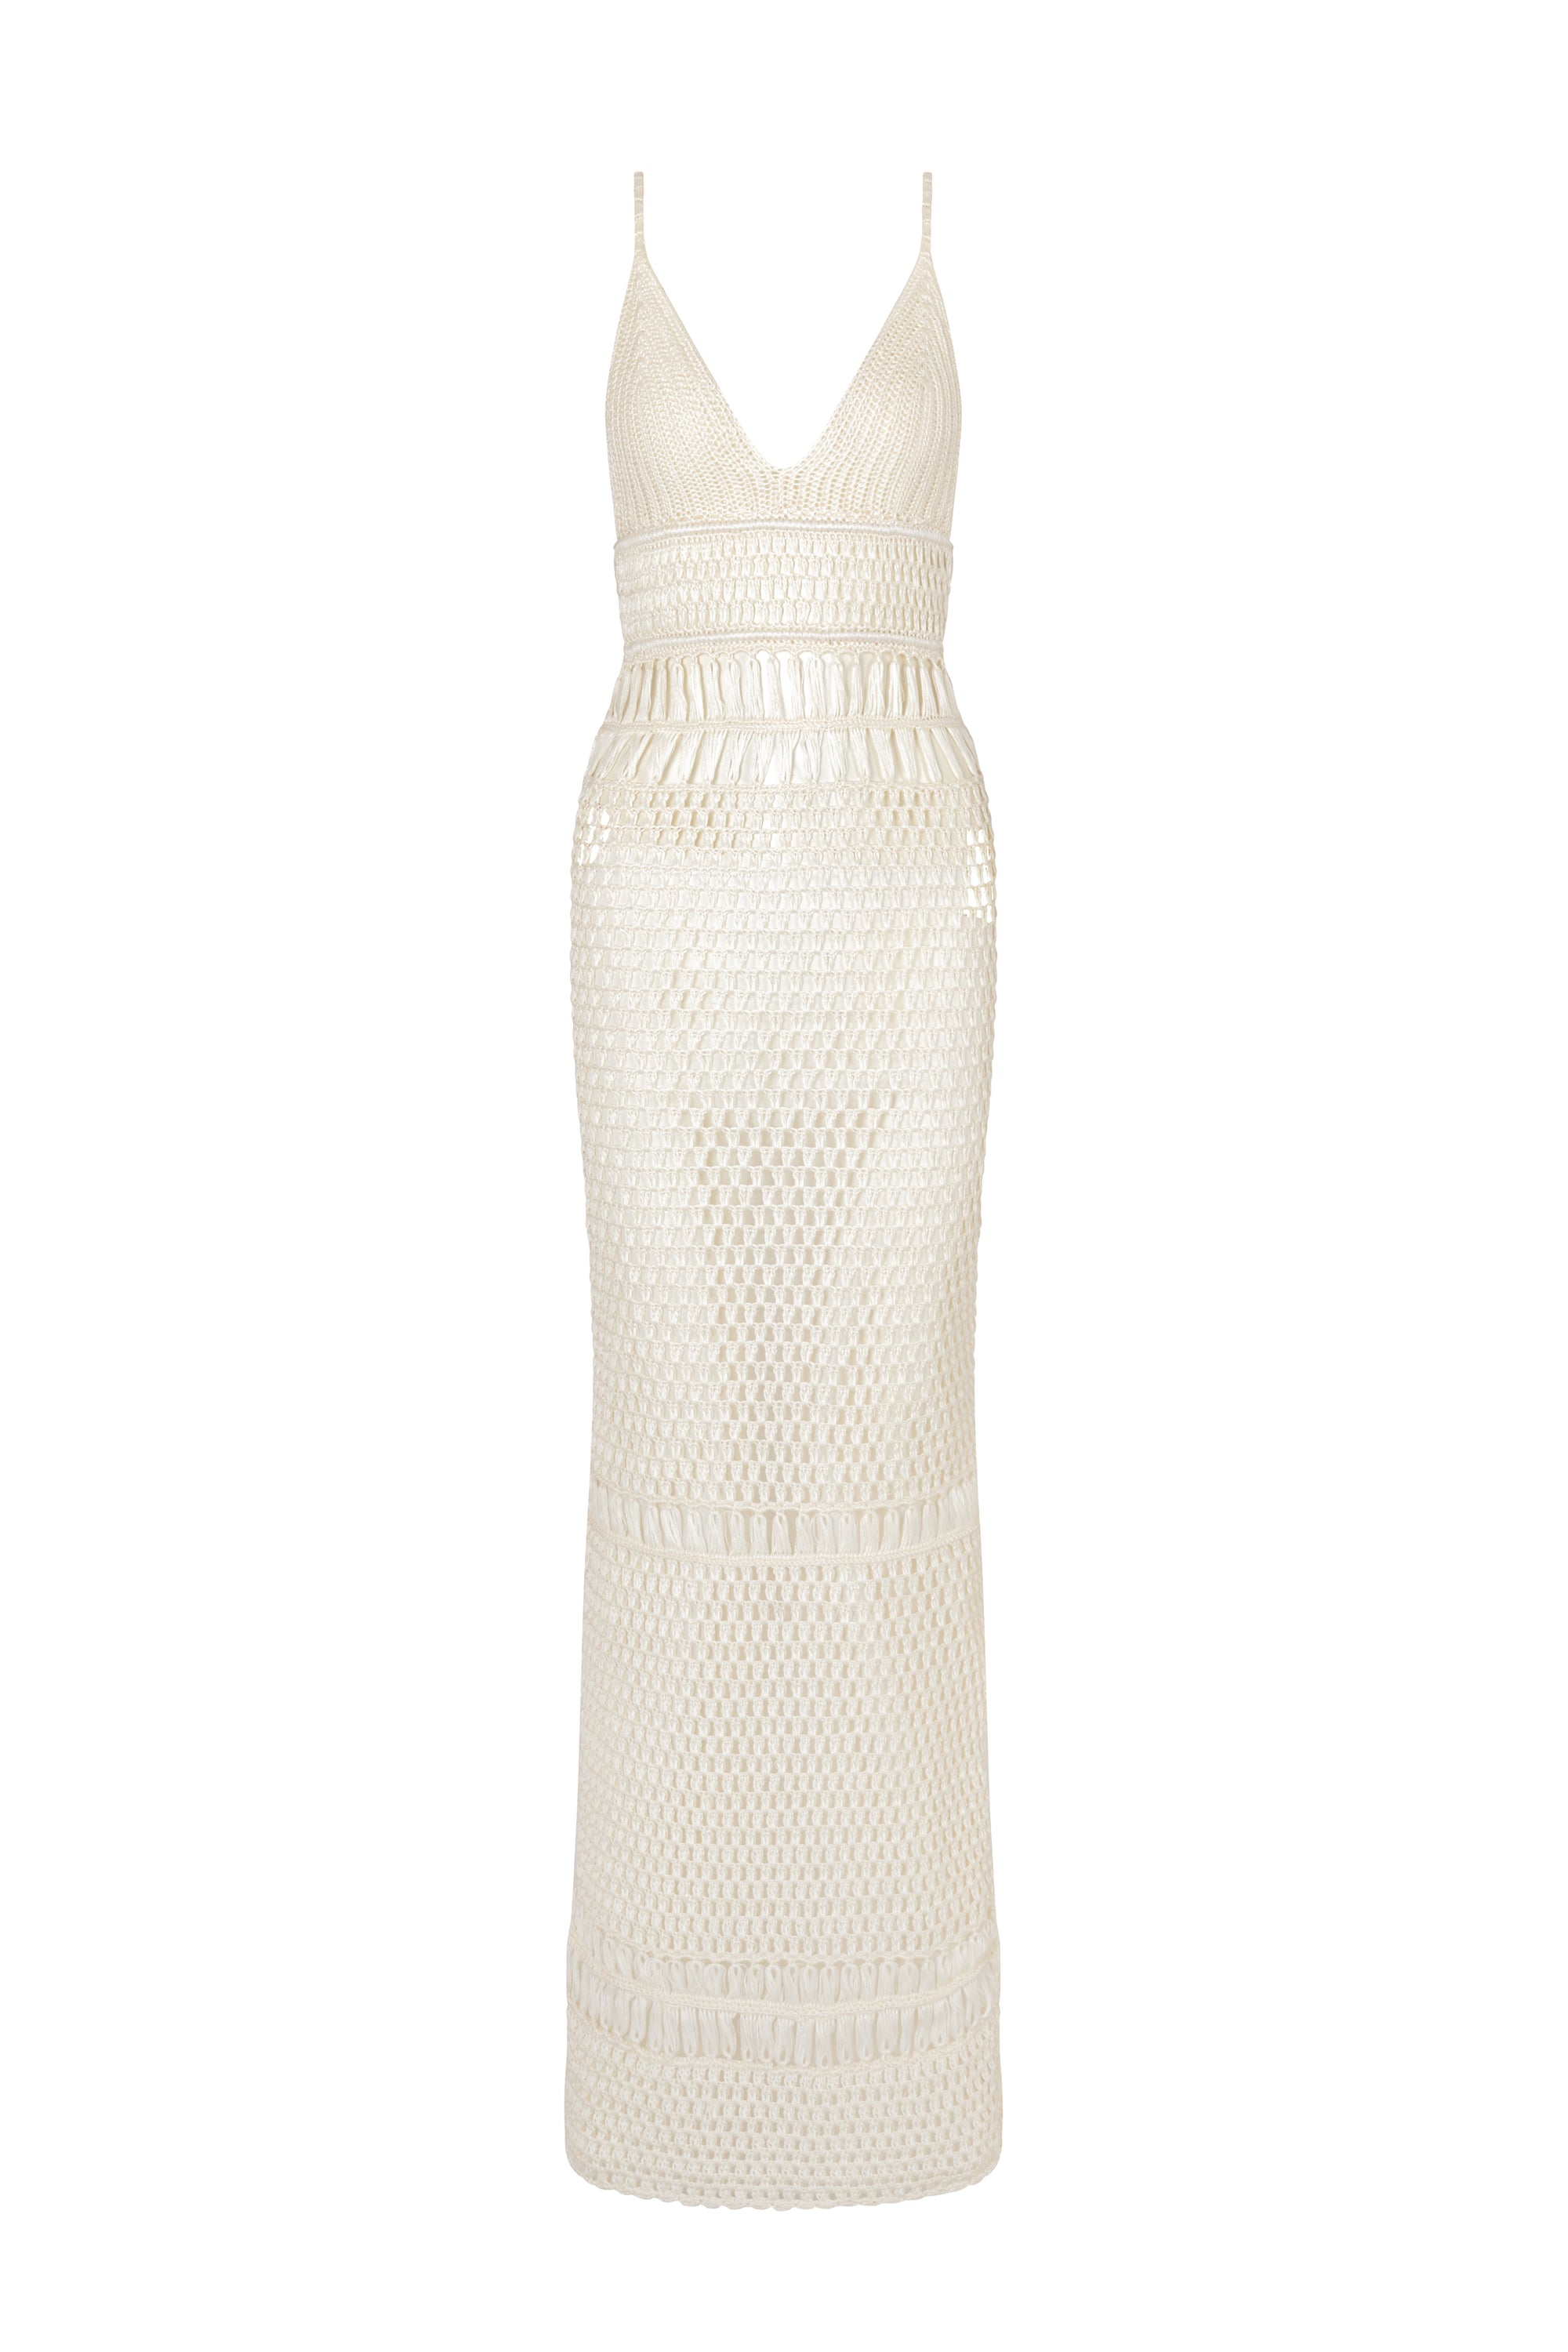 flook the label luana maxi dress white crochet product image front